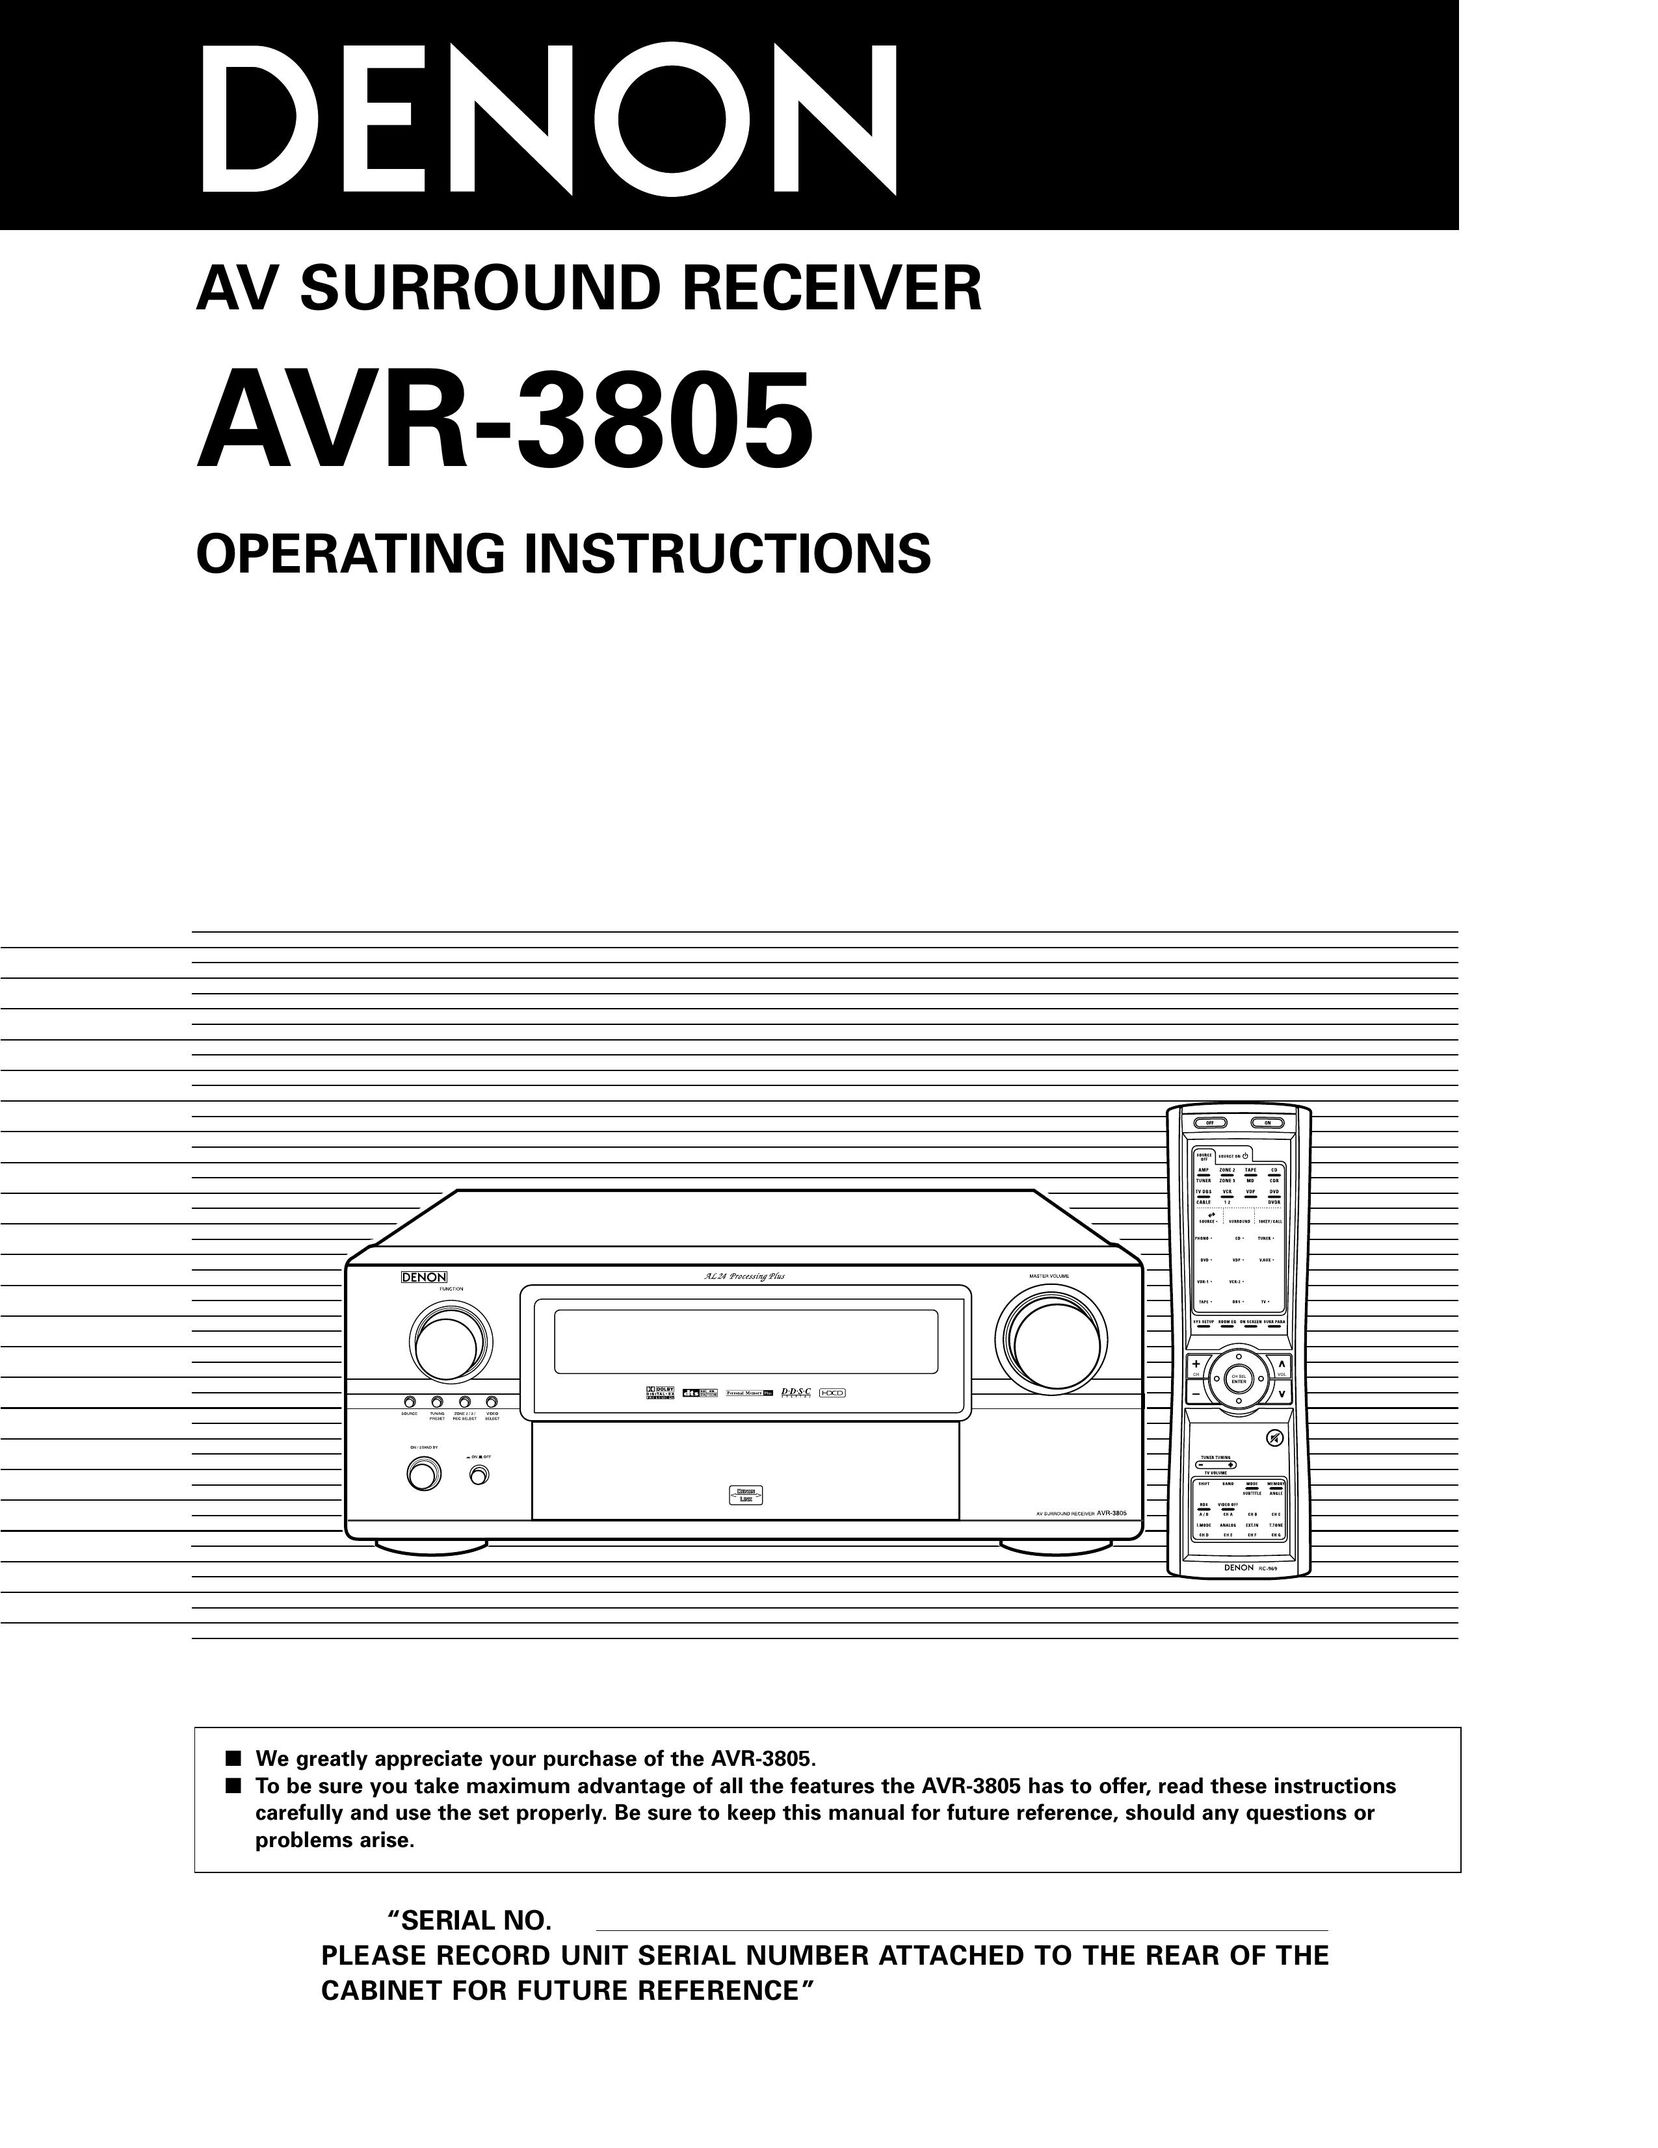 Denon AVR-3805 Home Theater System User Manual